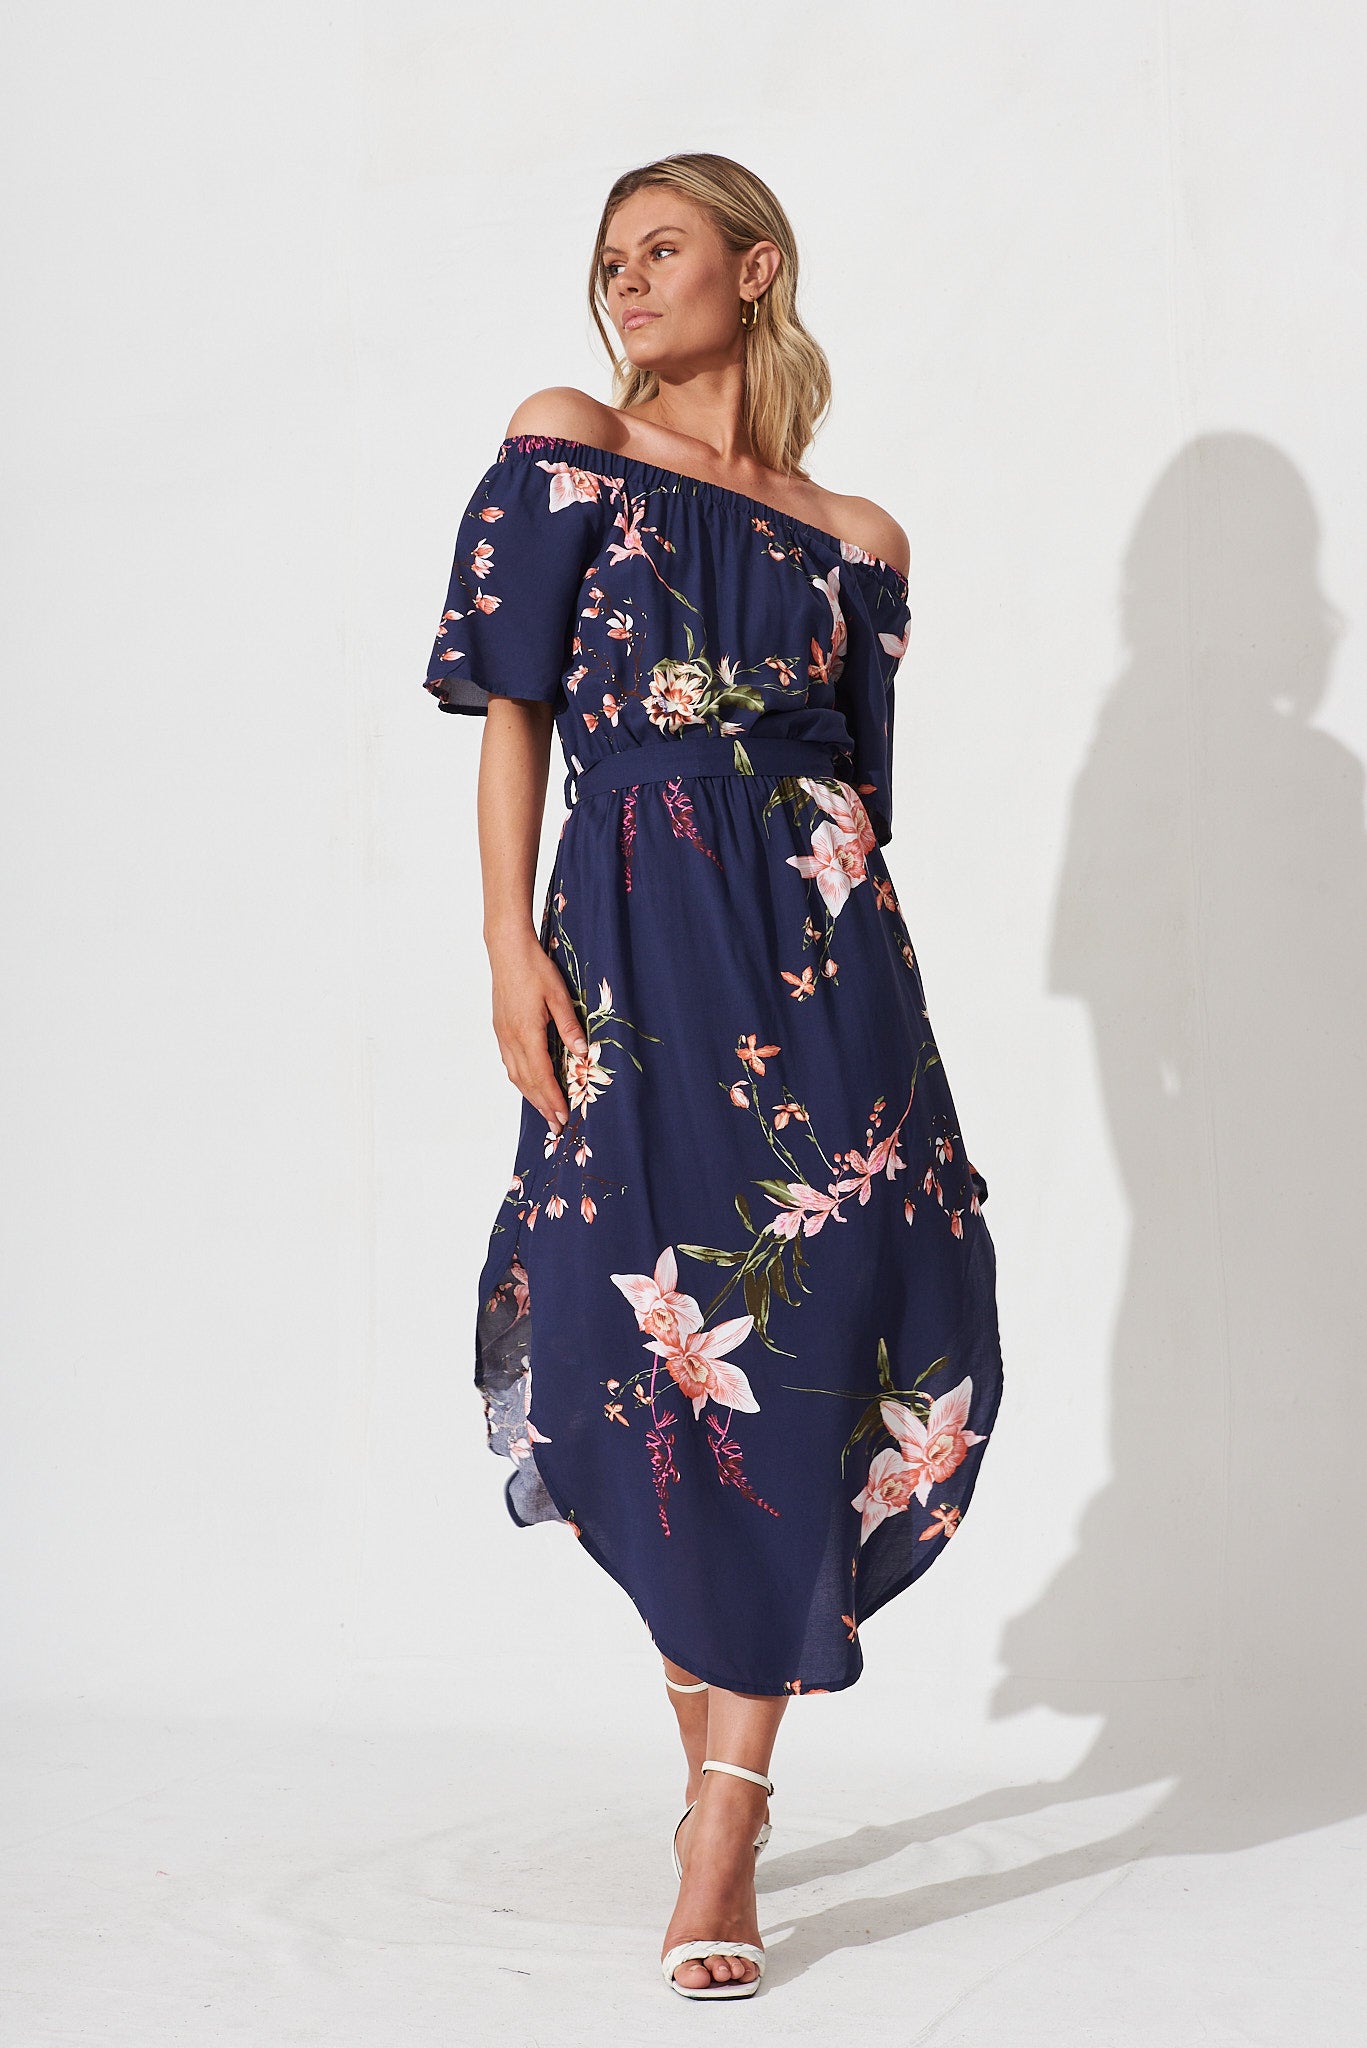 Hummingbird Dress In Navy With Apricot Floral - full length